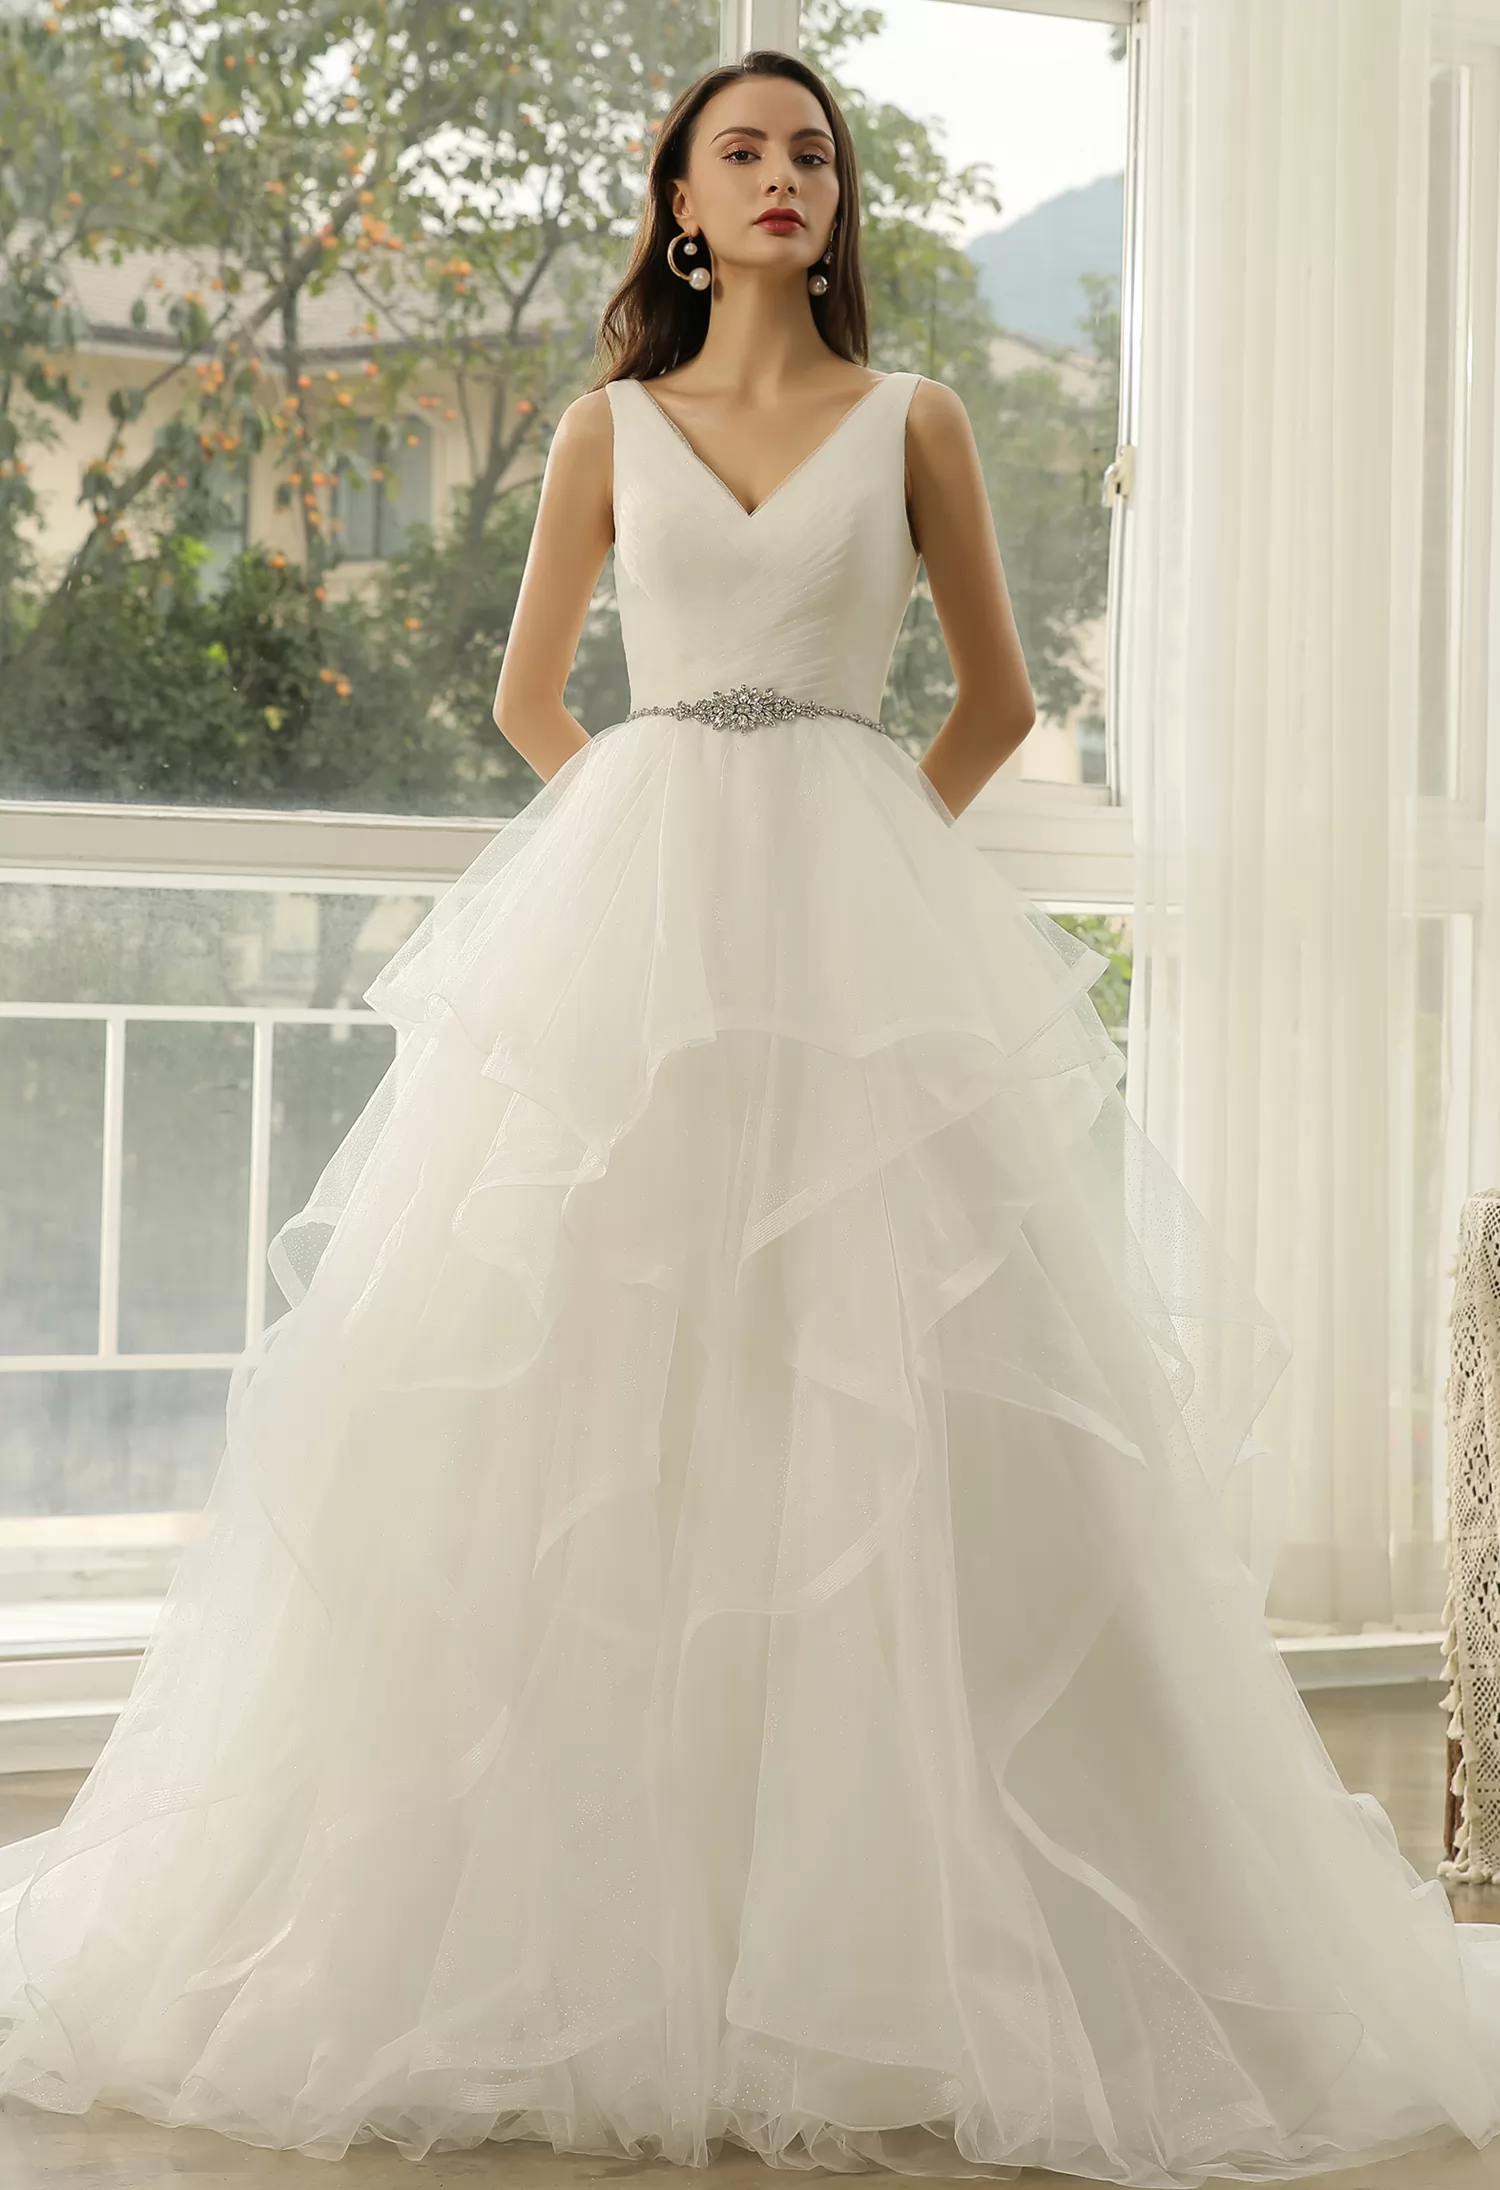 Wedding Dress In Ruffed Glitter Tulle With Princess Silhouette